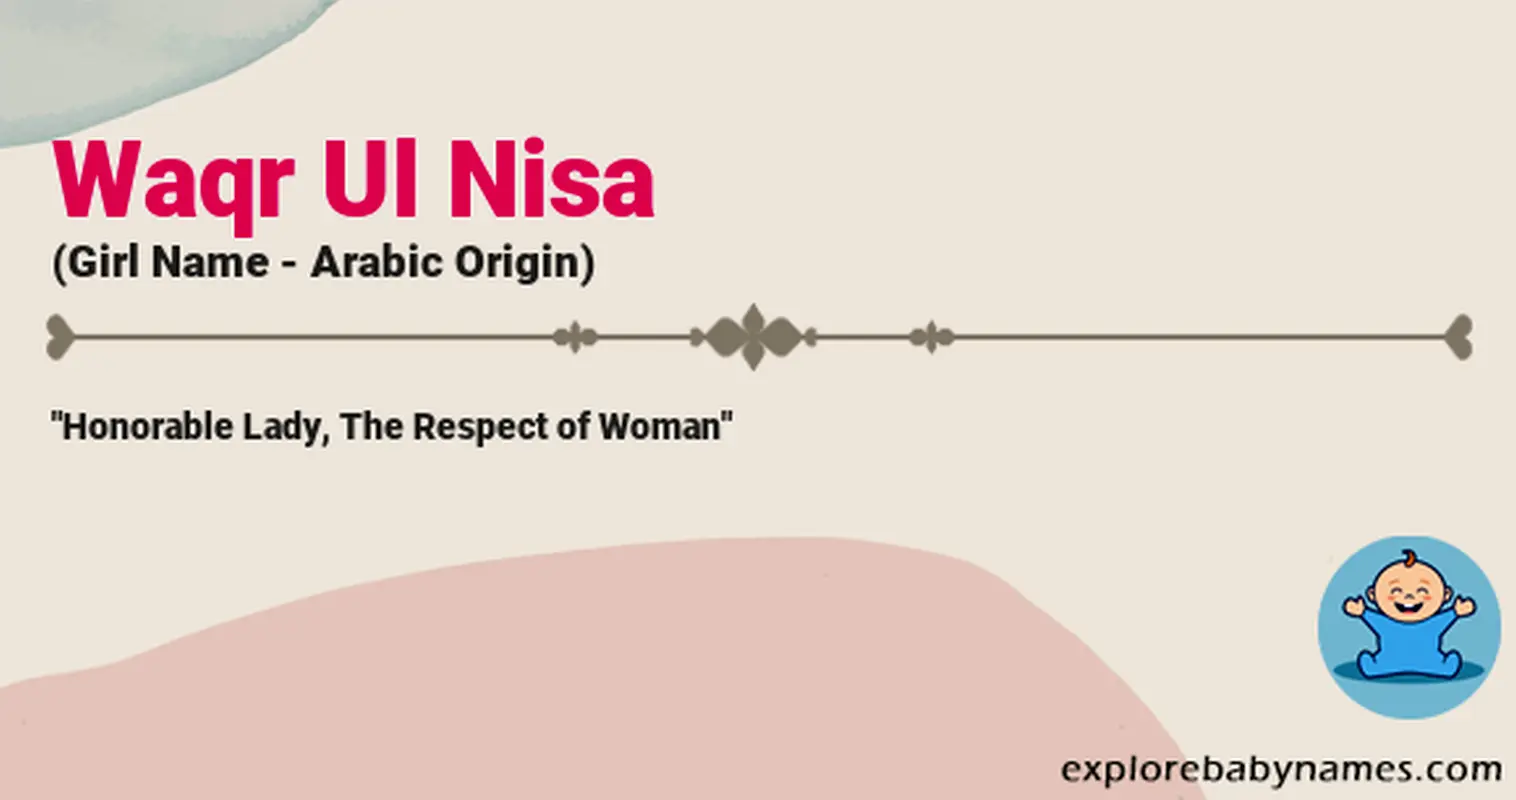 Meaning of Waqr Ul Nisa